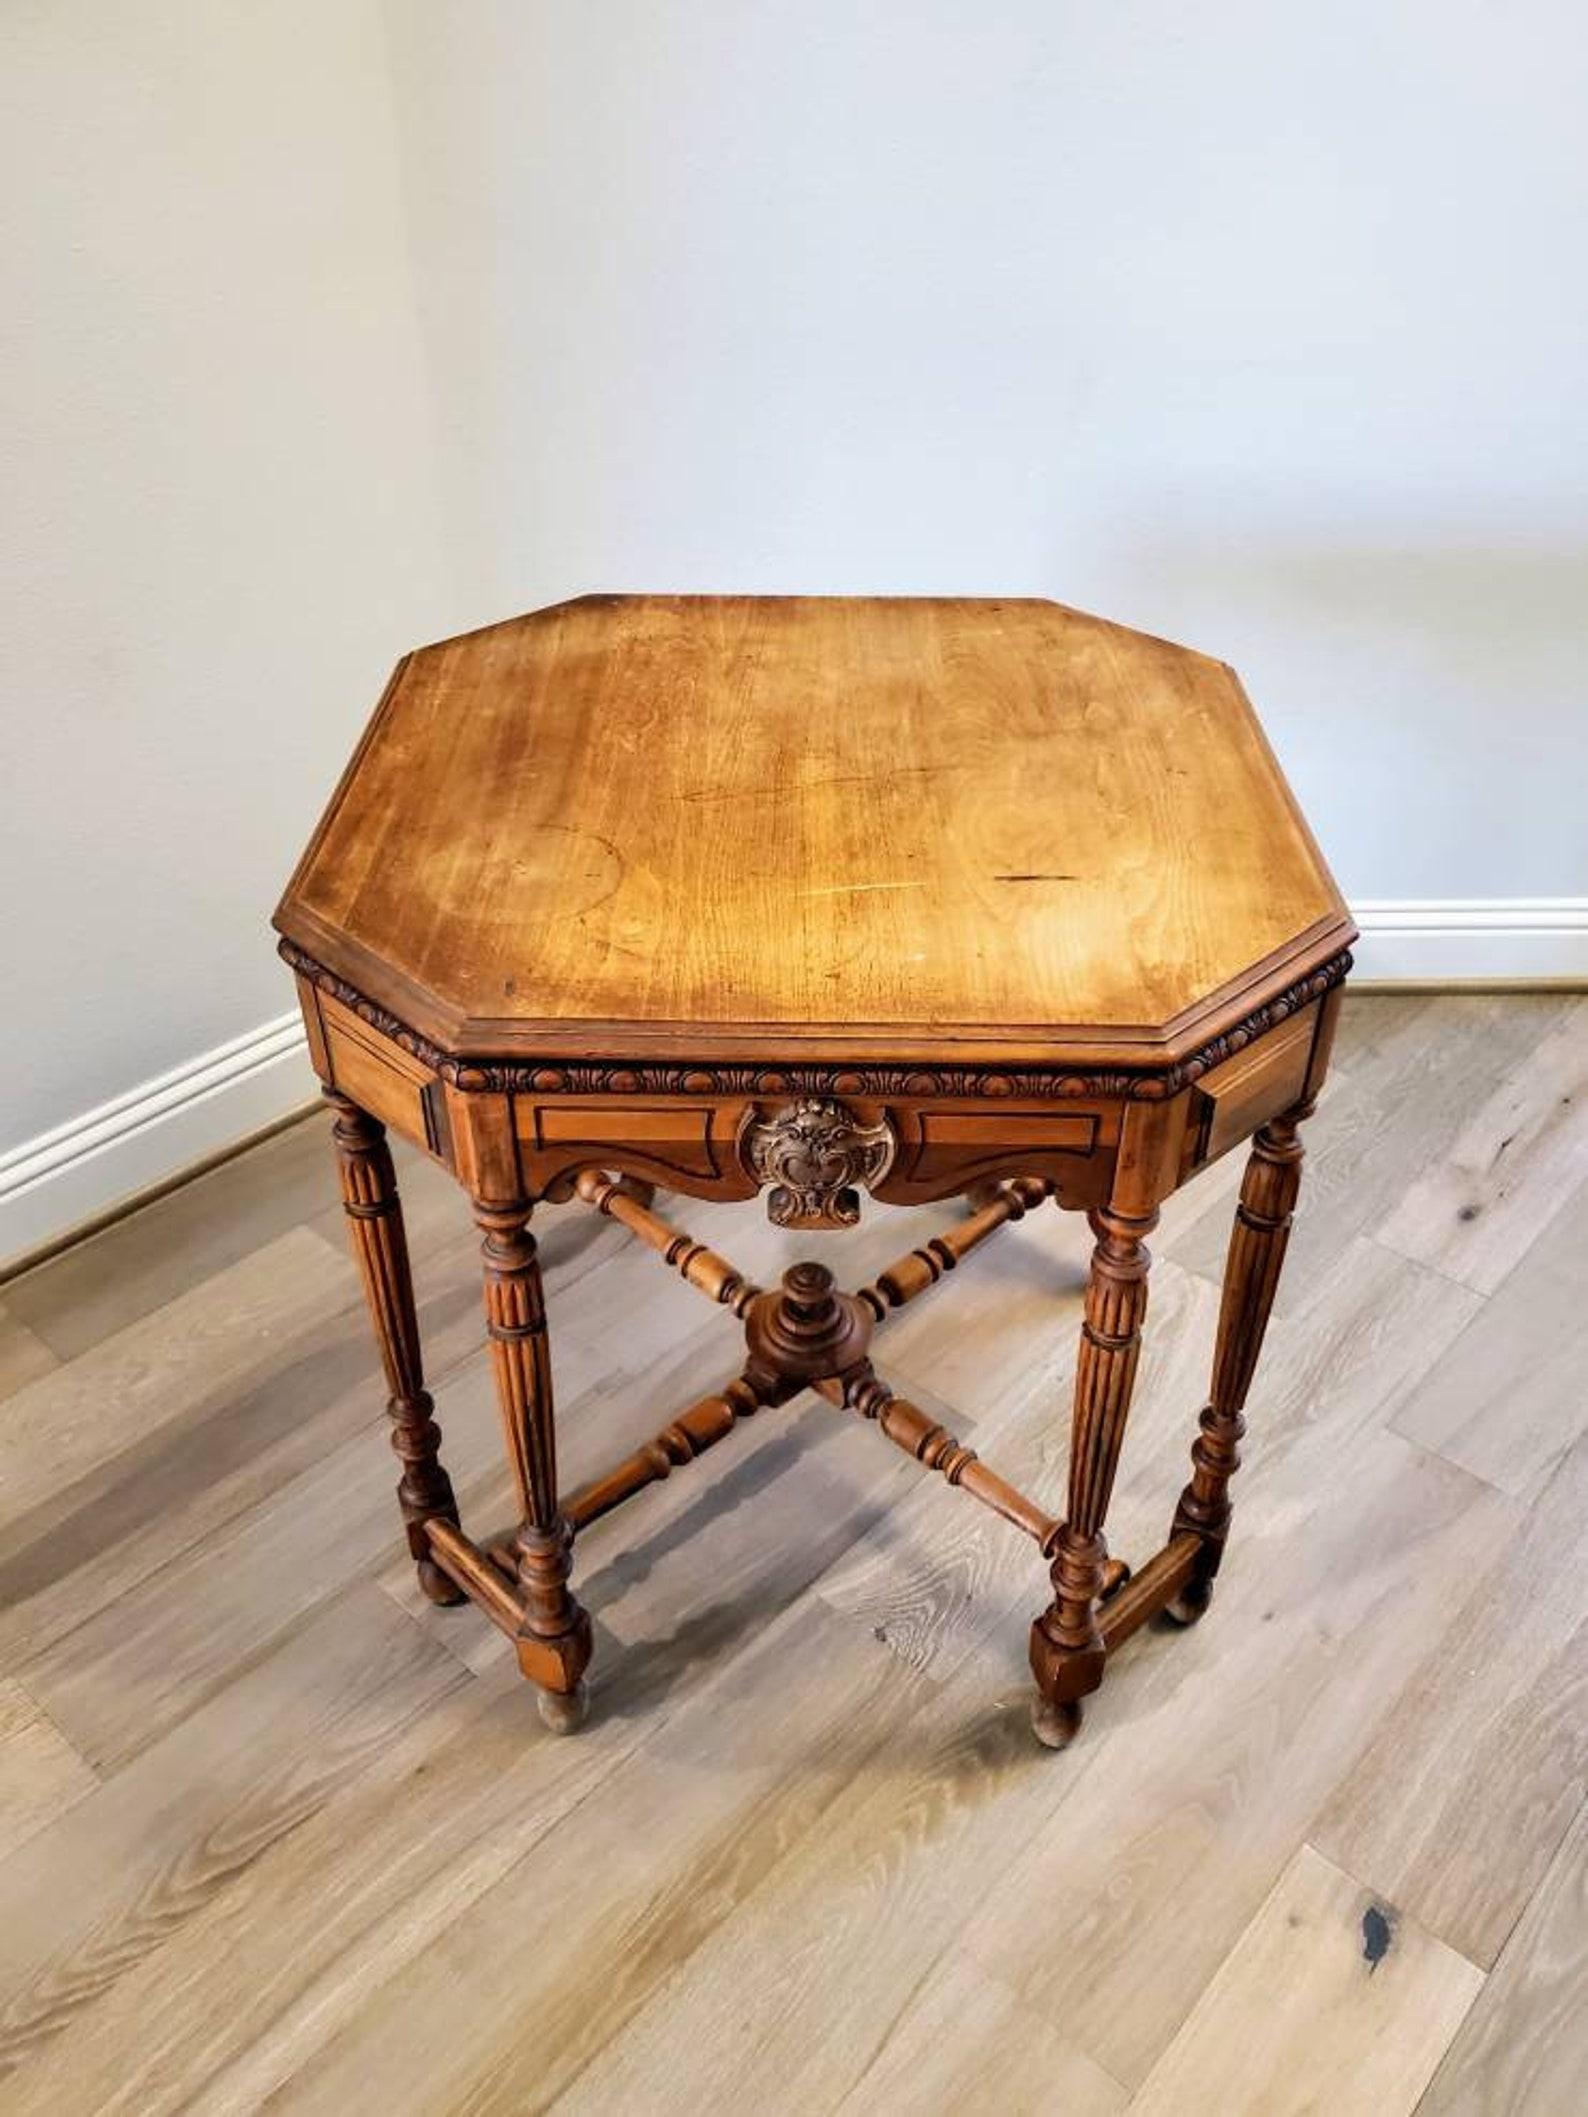 An antique American centre - center table from the estate of the late Robert L. Thornton (1884-1964). Crafted in the early 20th century from rich walnut, having a shaped octagonal top with molded edge, over scalloped apron decorated with gardooning